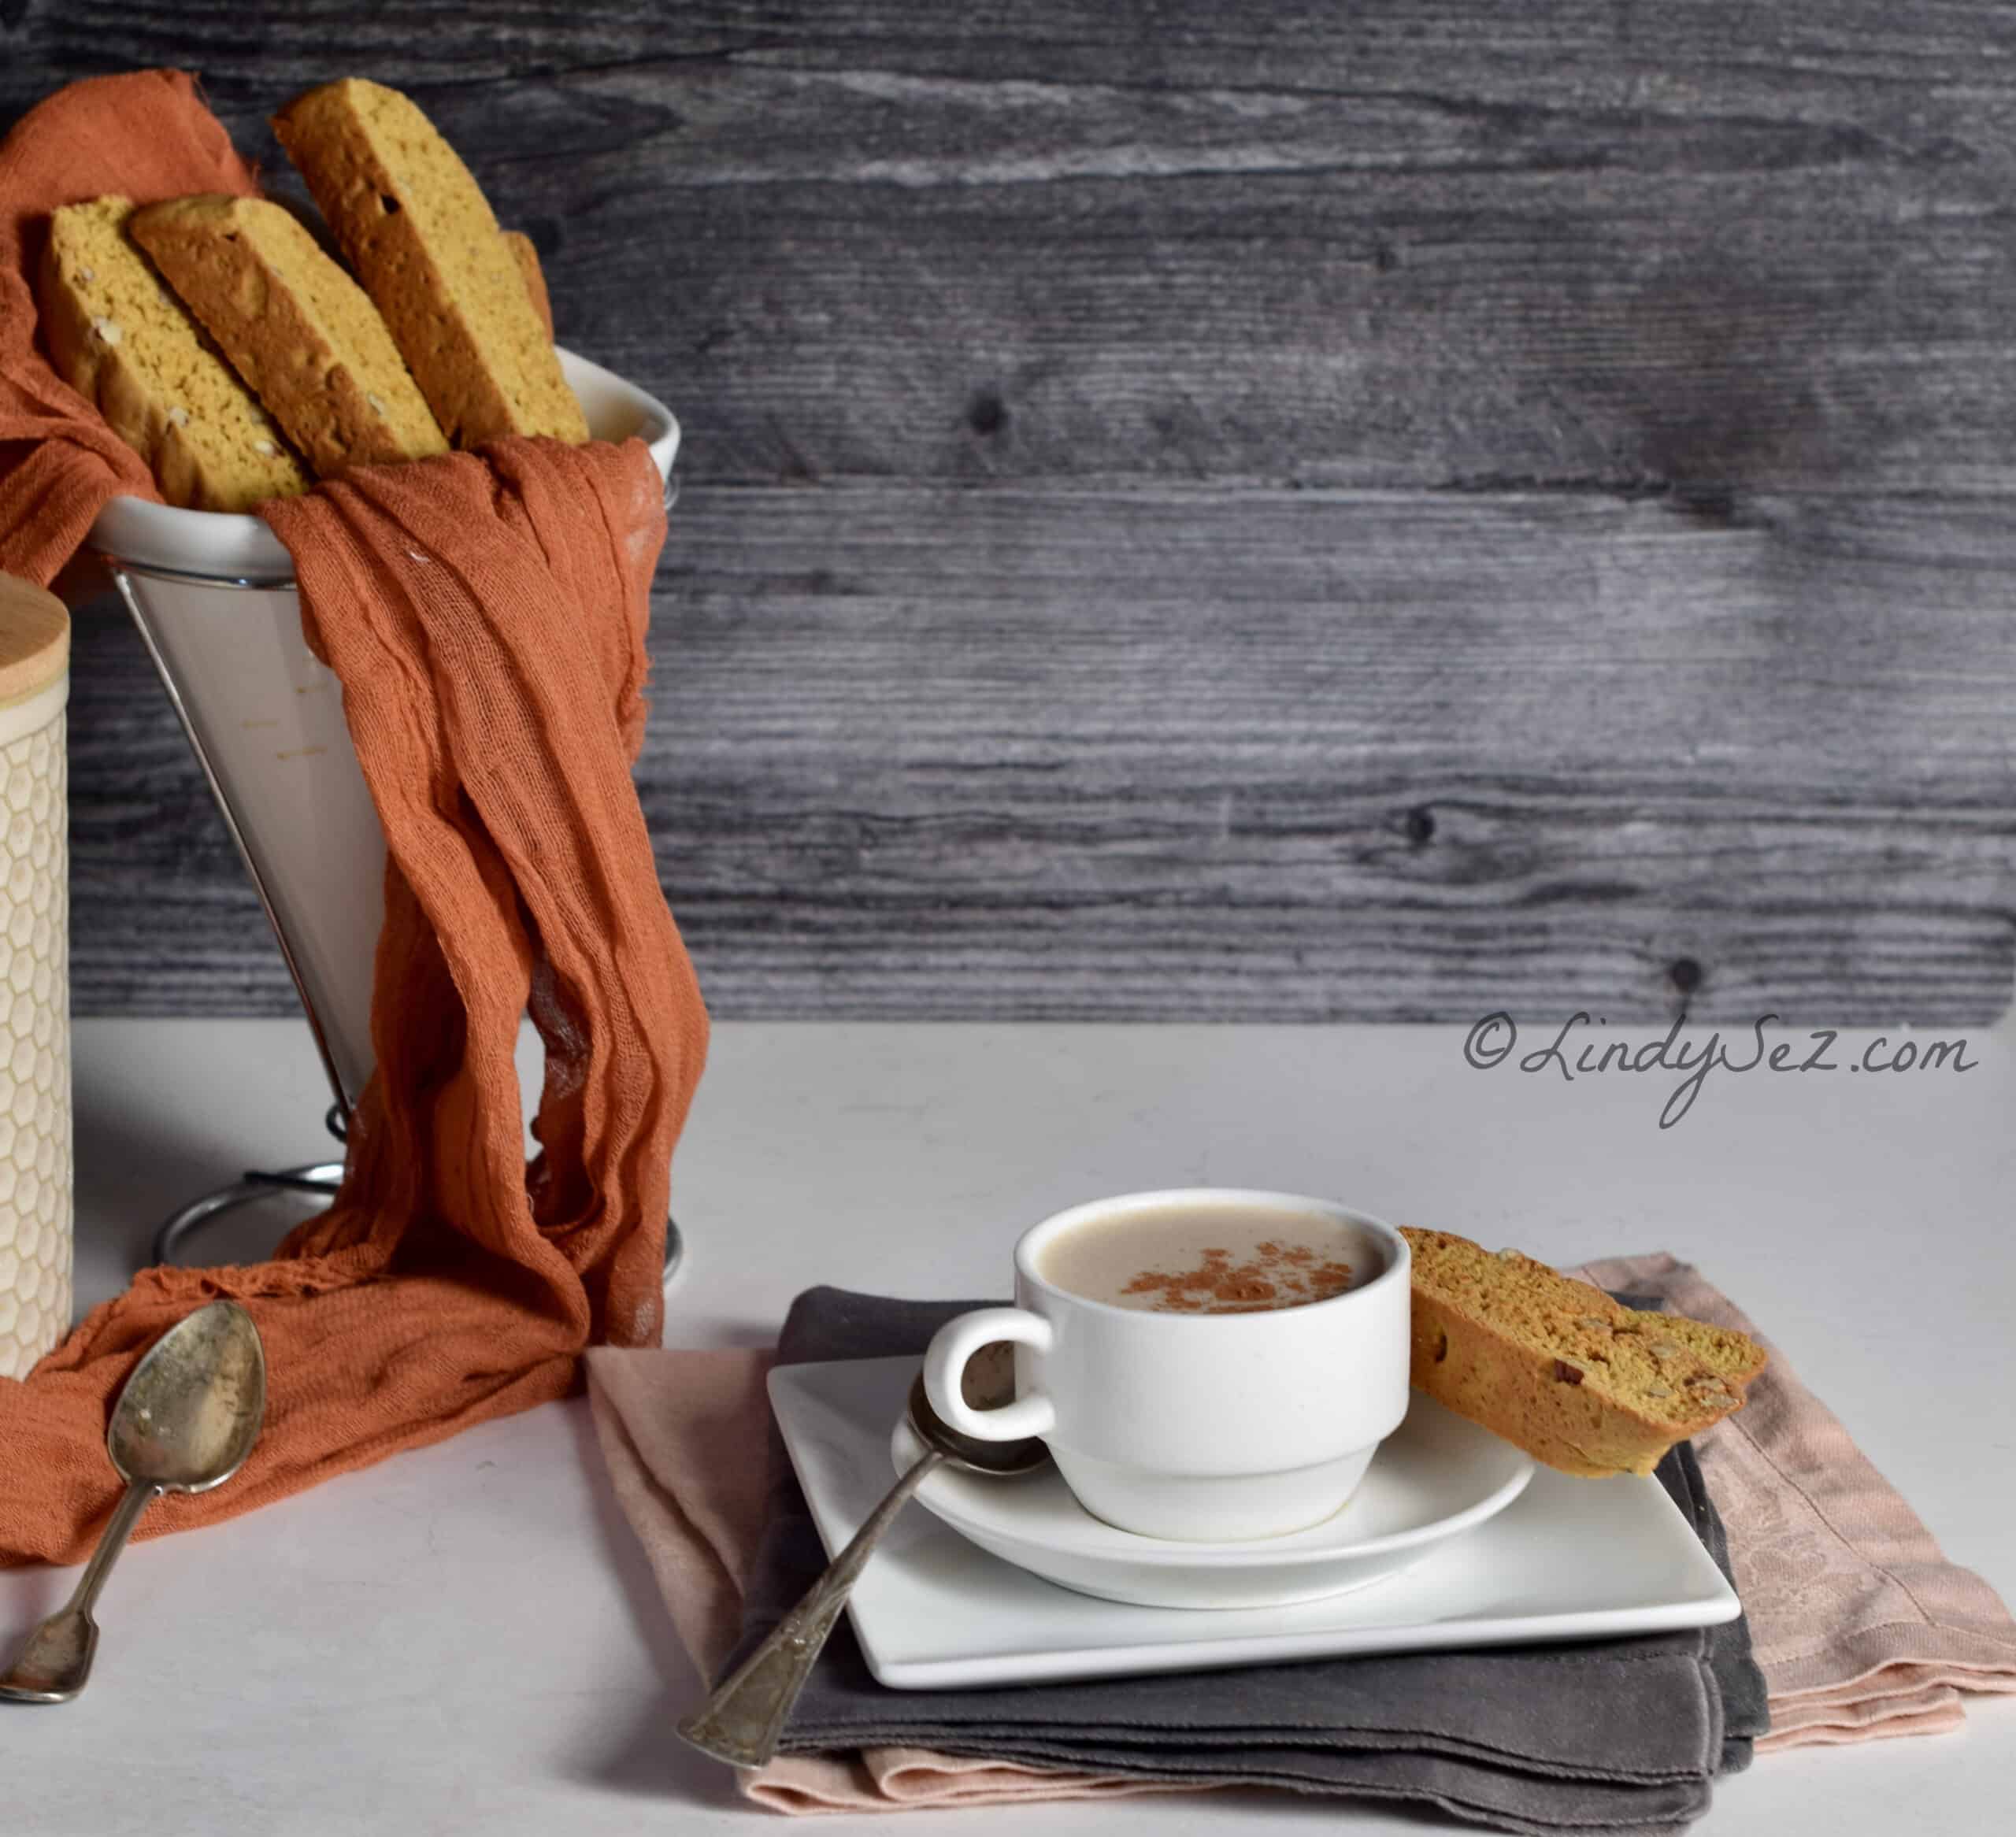 A plate of biscotti with a cup of coffee.